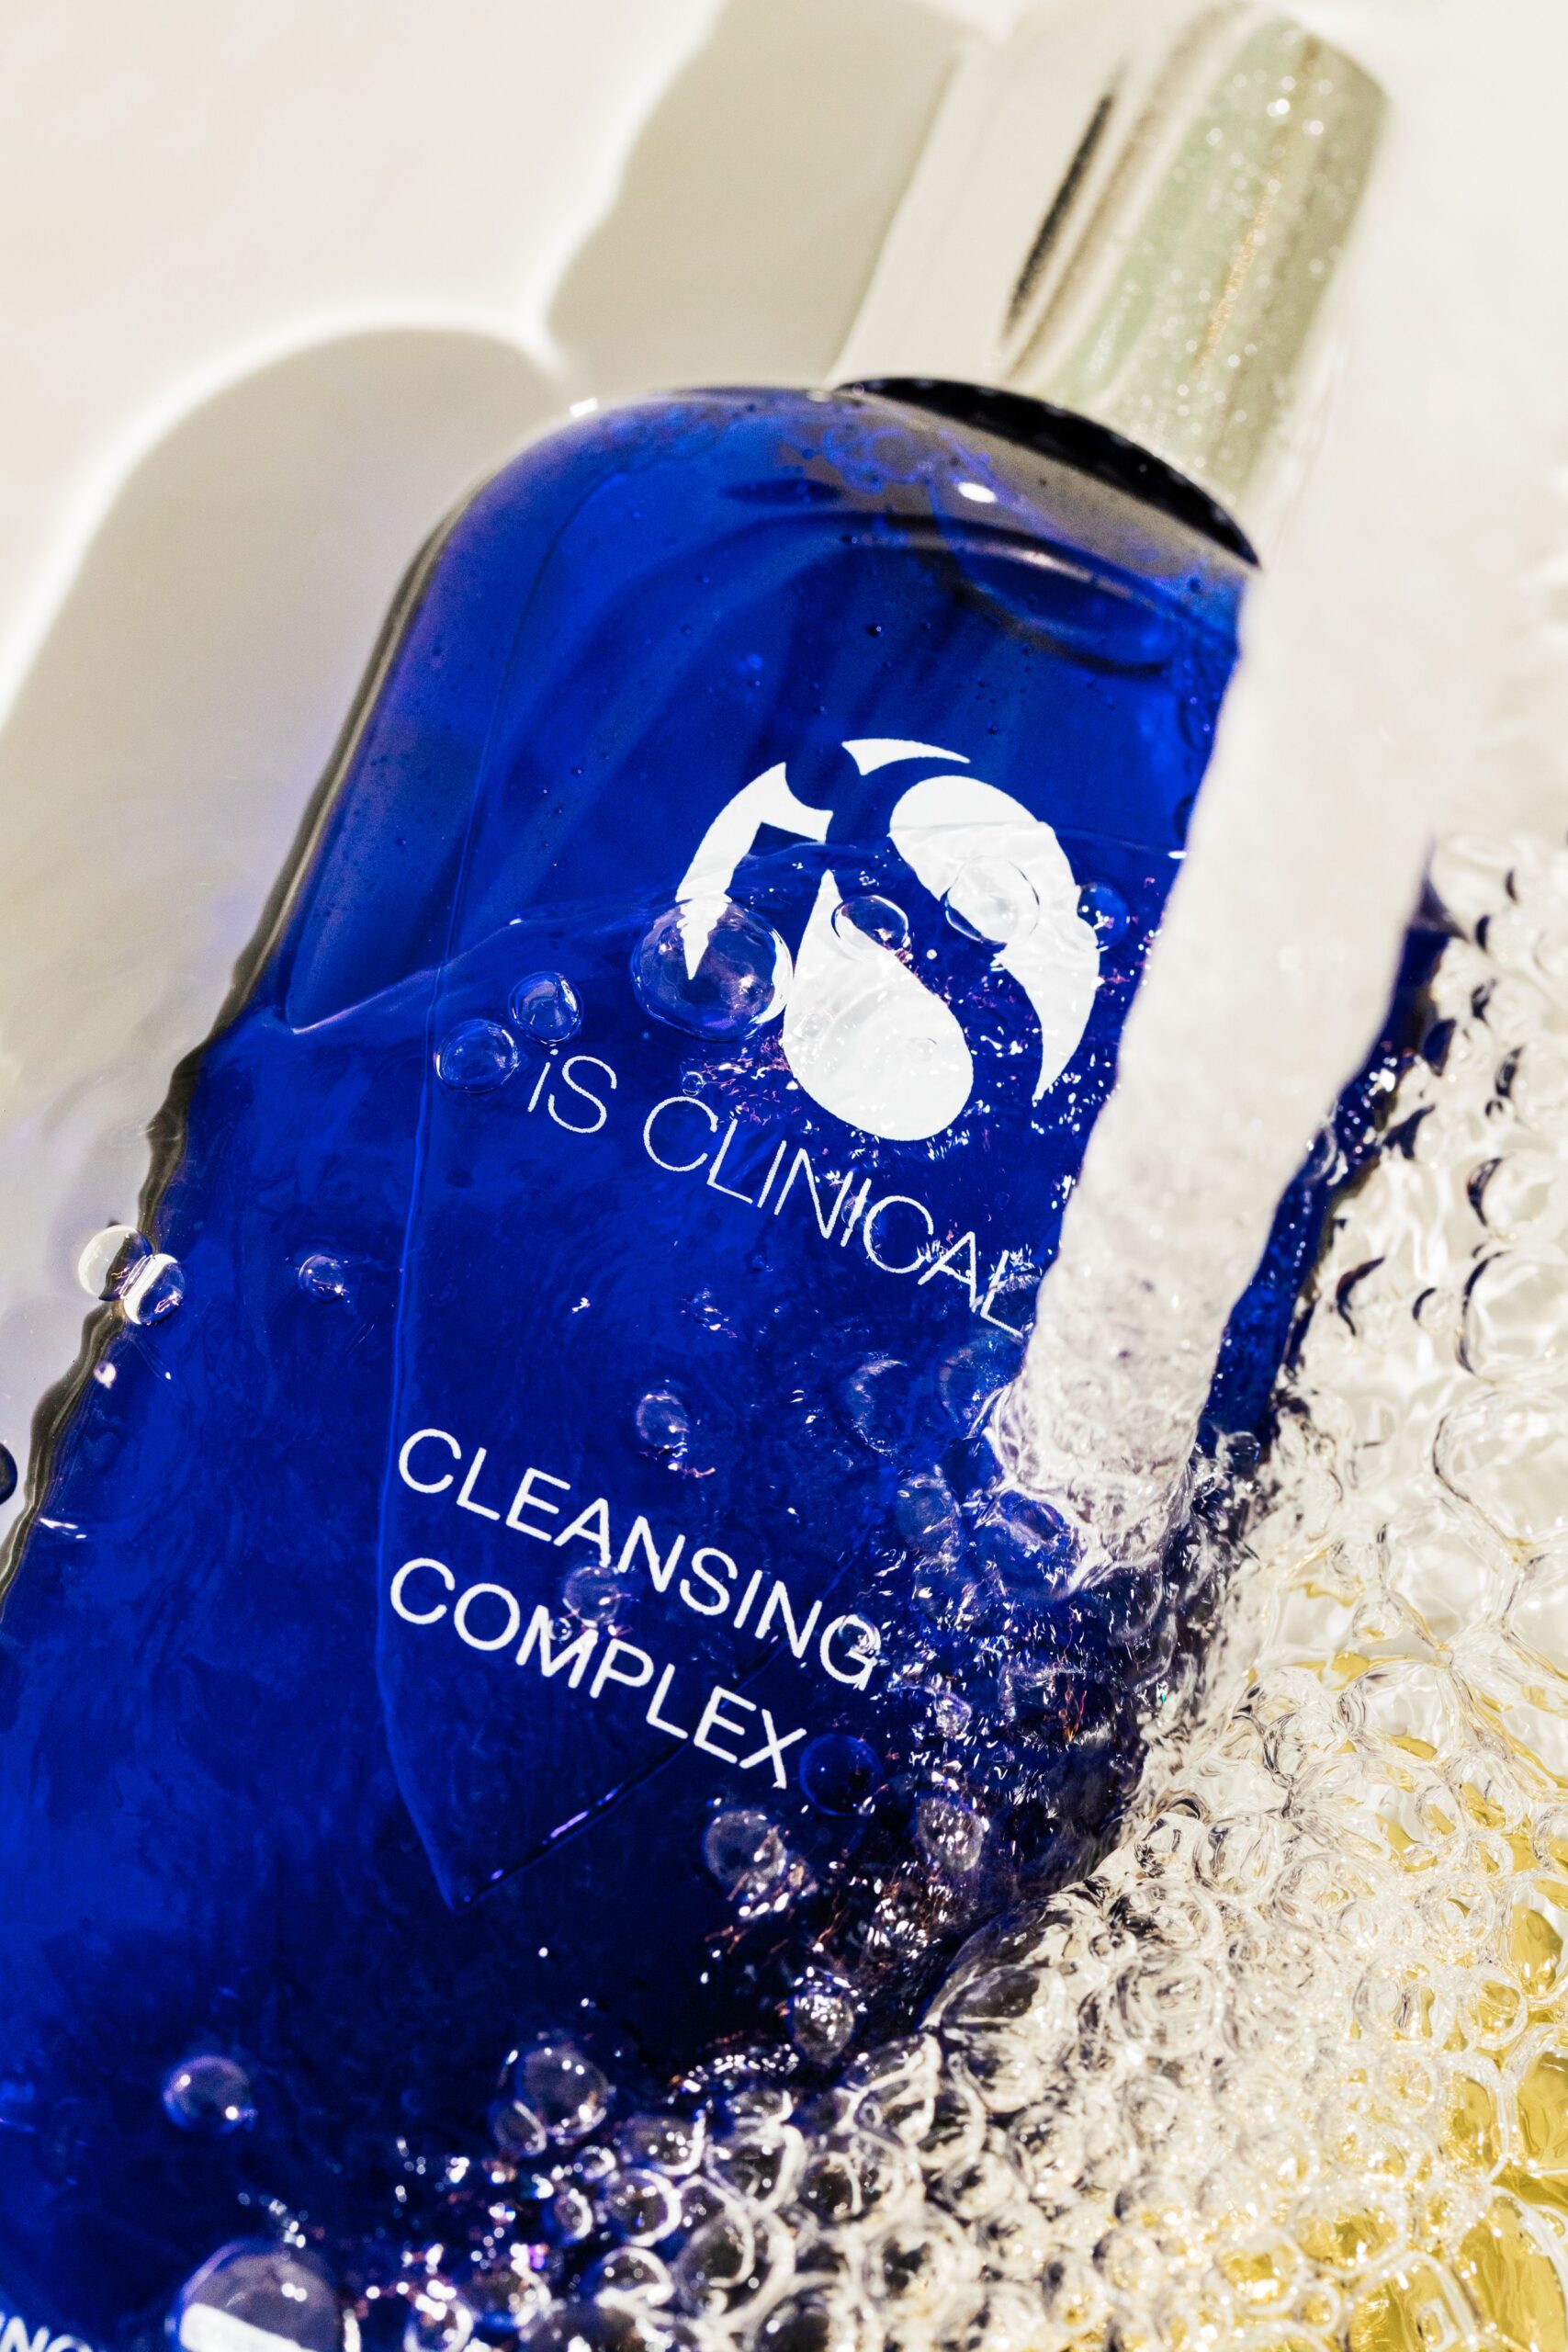 IS clinical Cleansing Complex